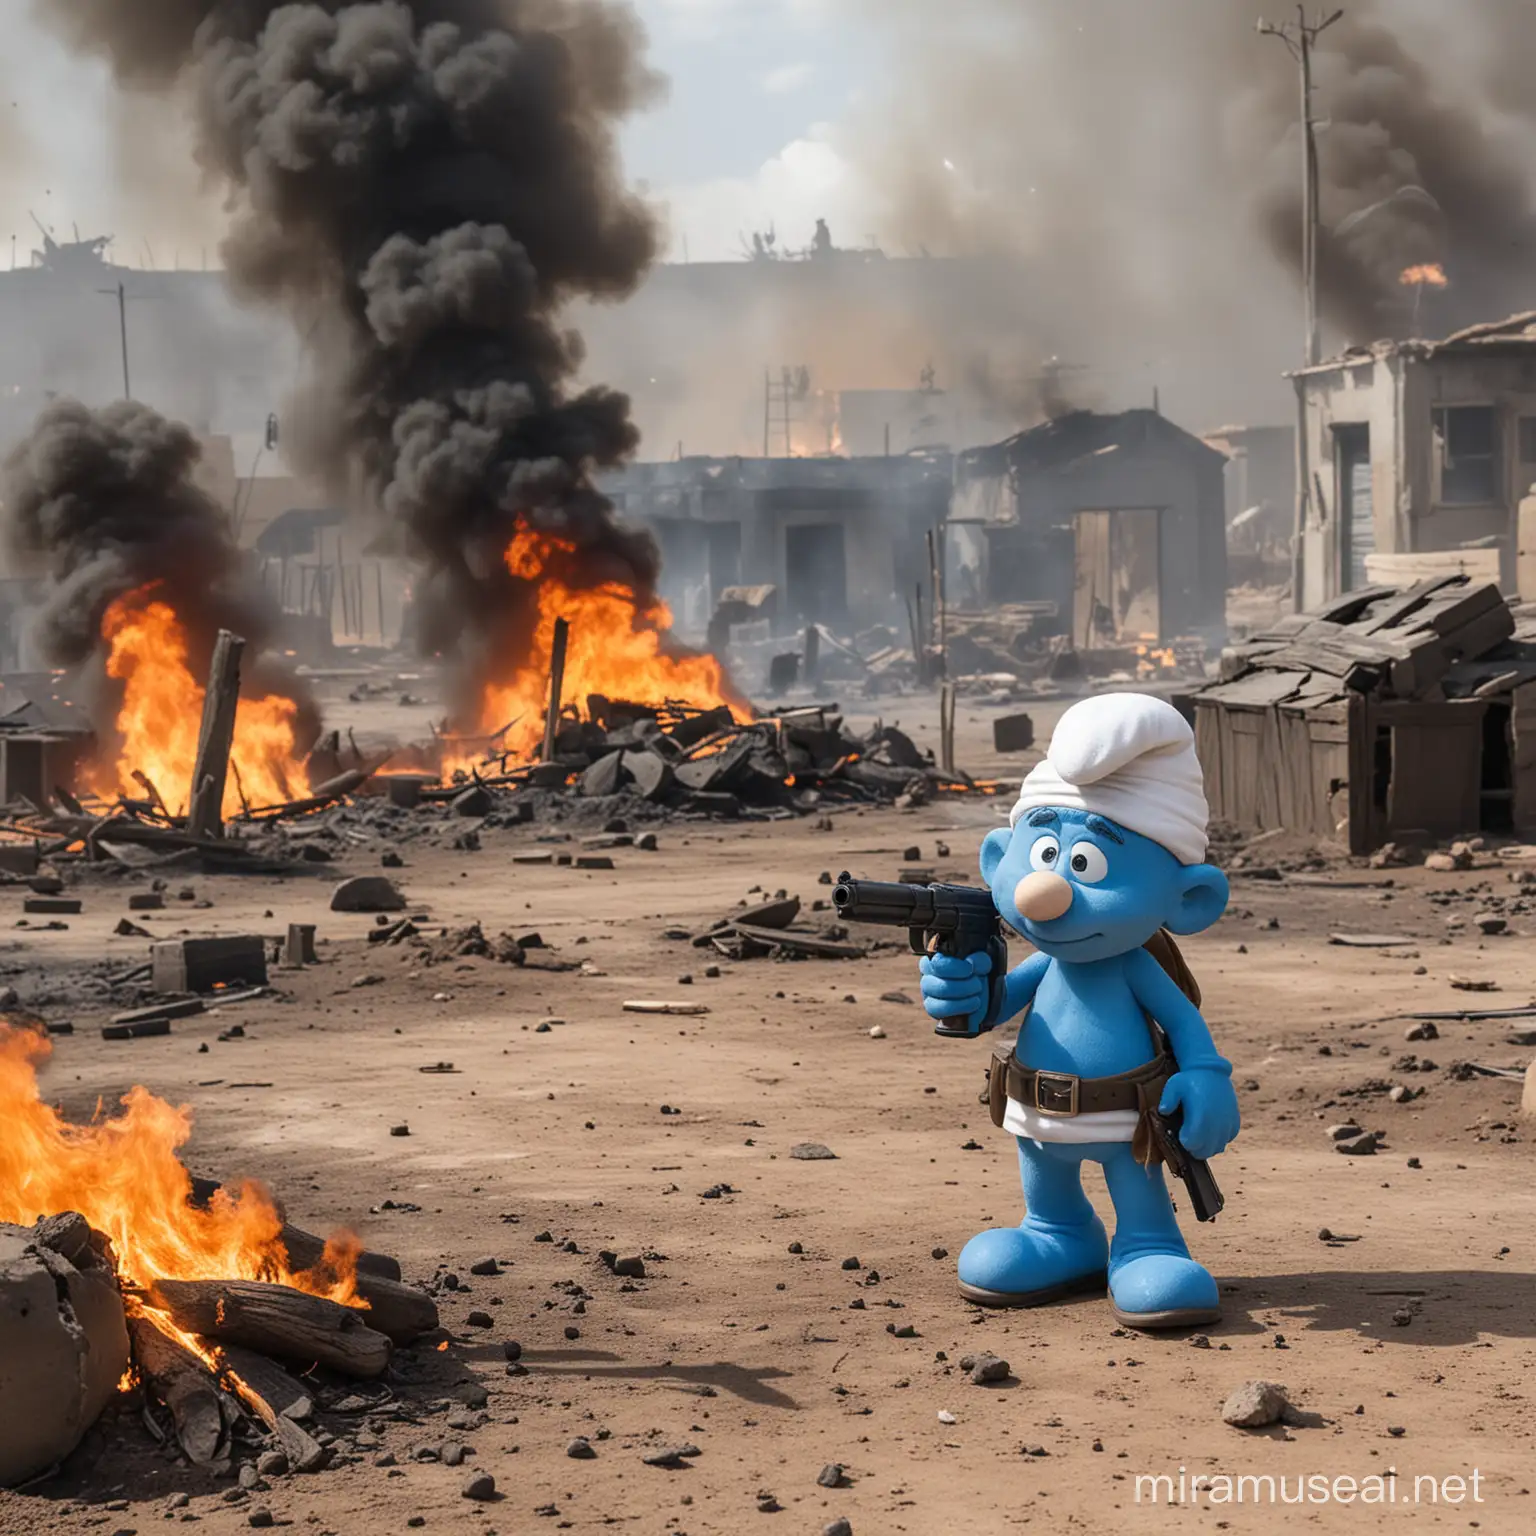   Smurf inwar torn area. open space. fires and explosions, holding a gun, with a military uniform